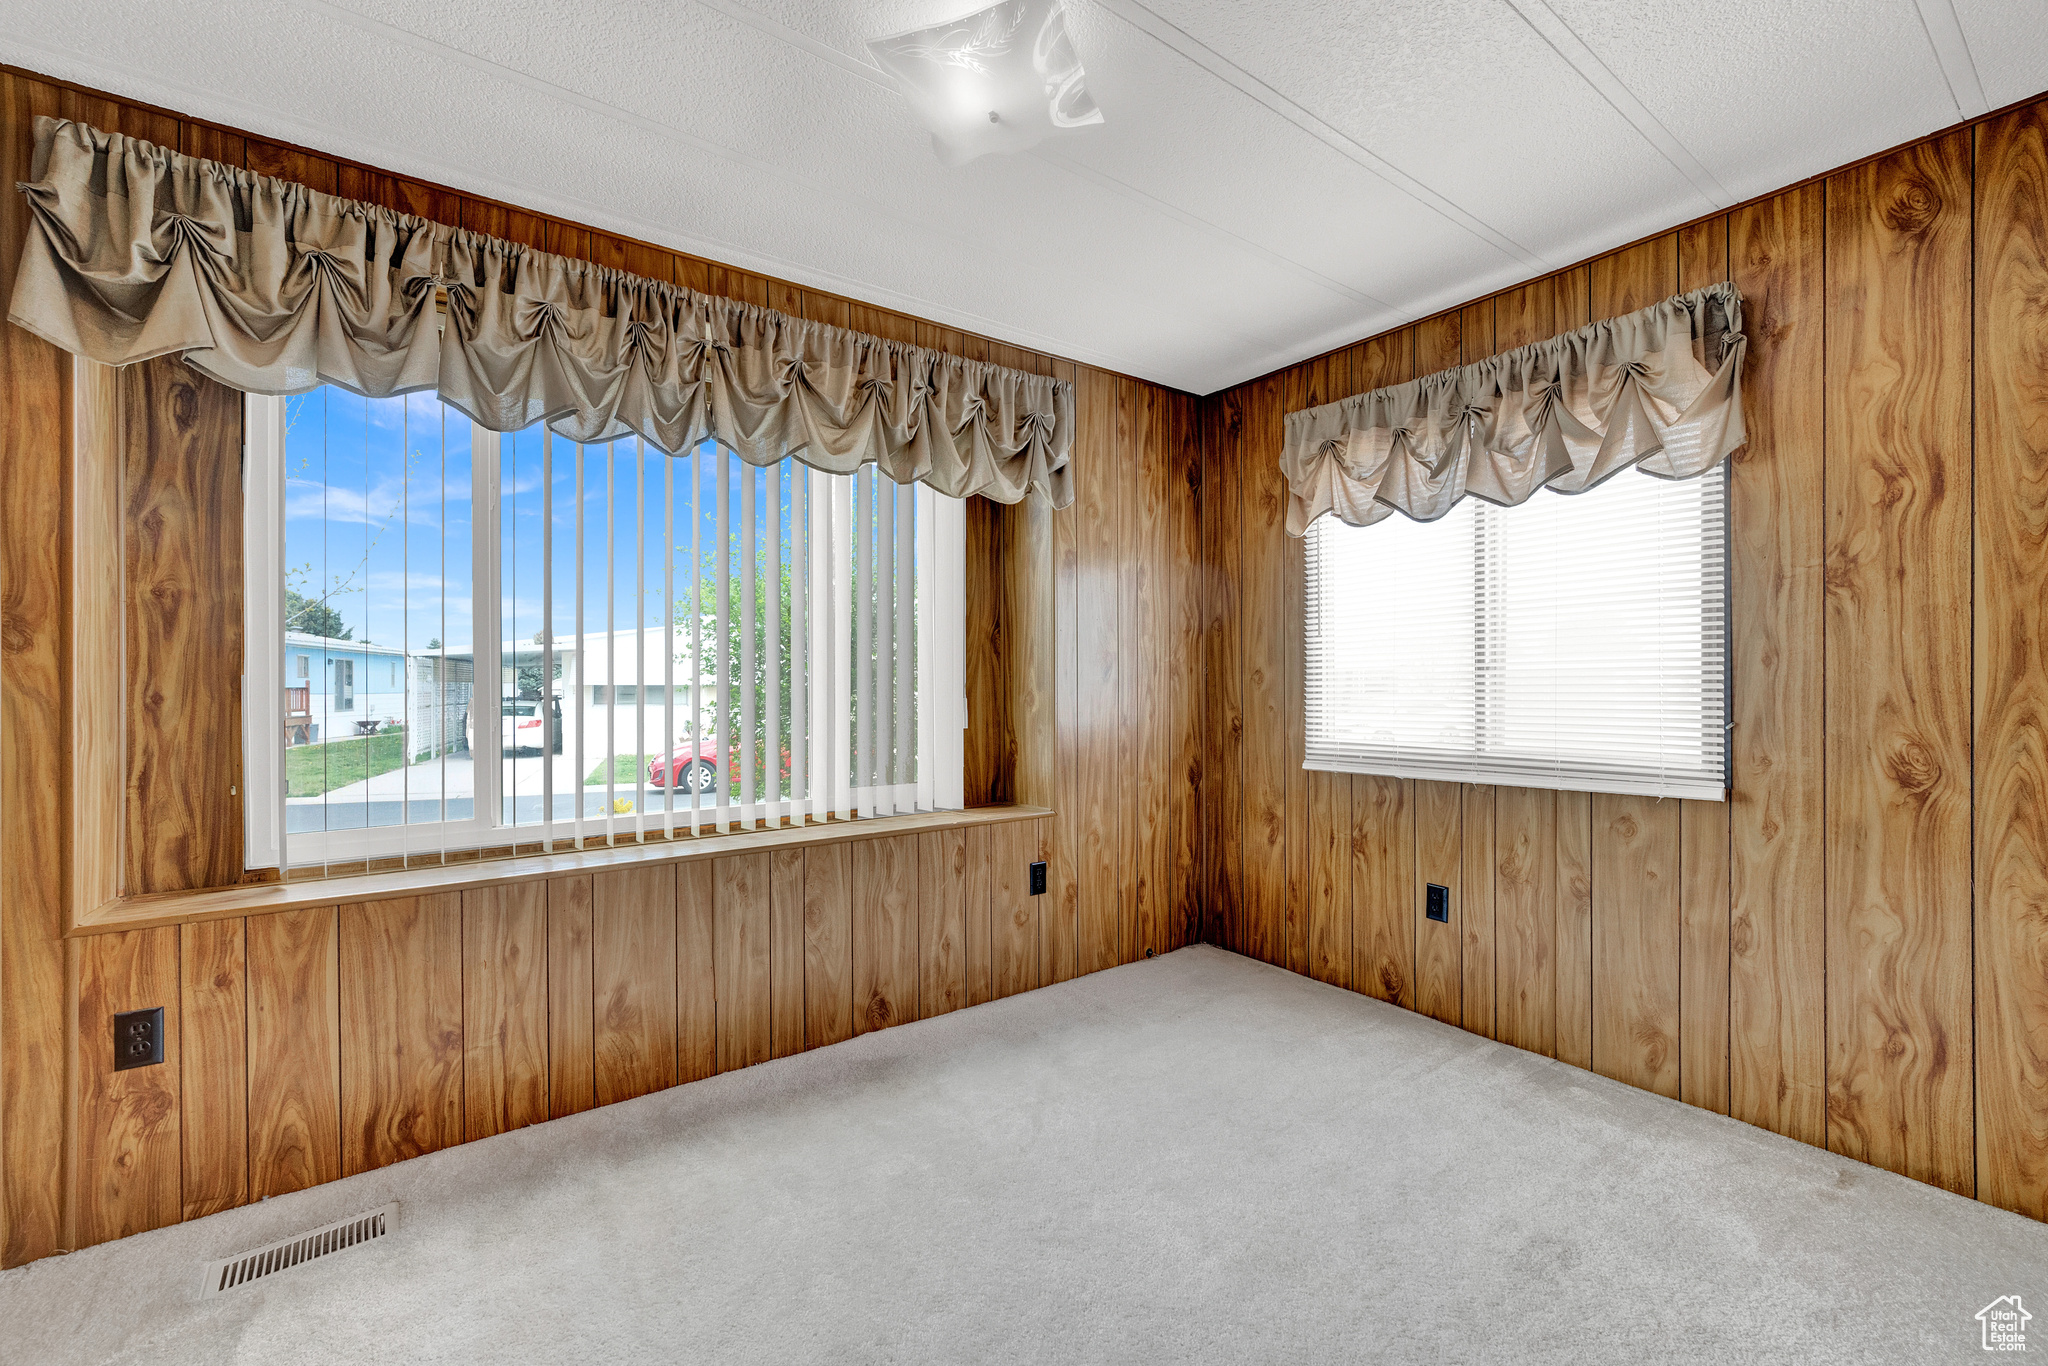 Carpeted empty room featuring wooden walls